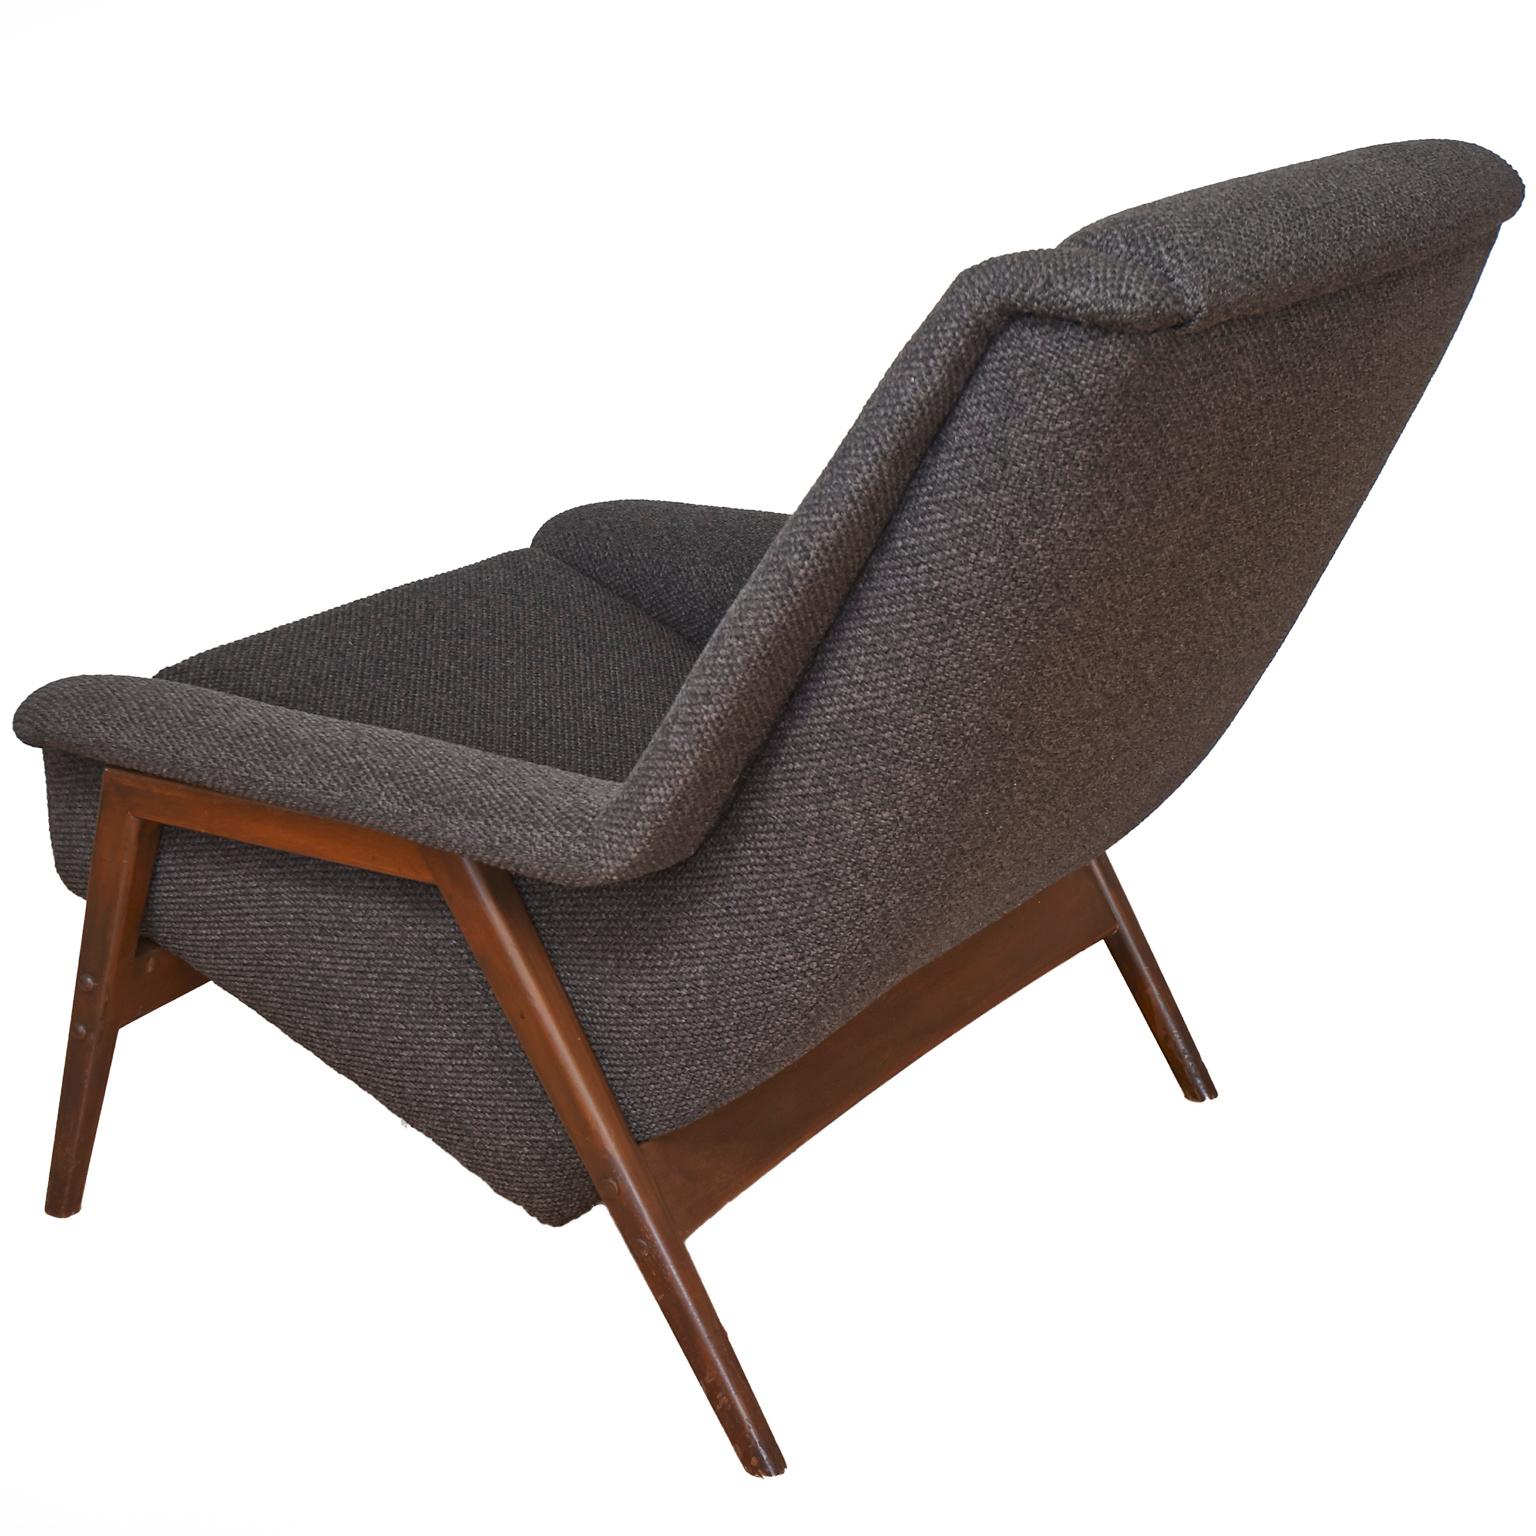 Machine-Made Folke Ohlsson for DUX Lounge Chair